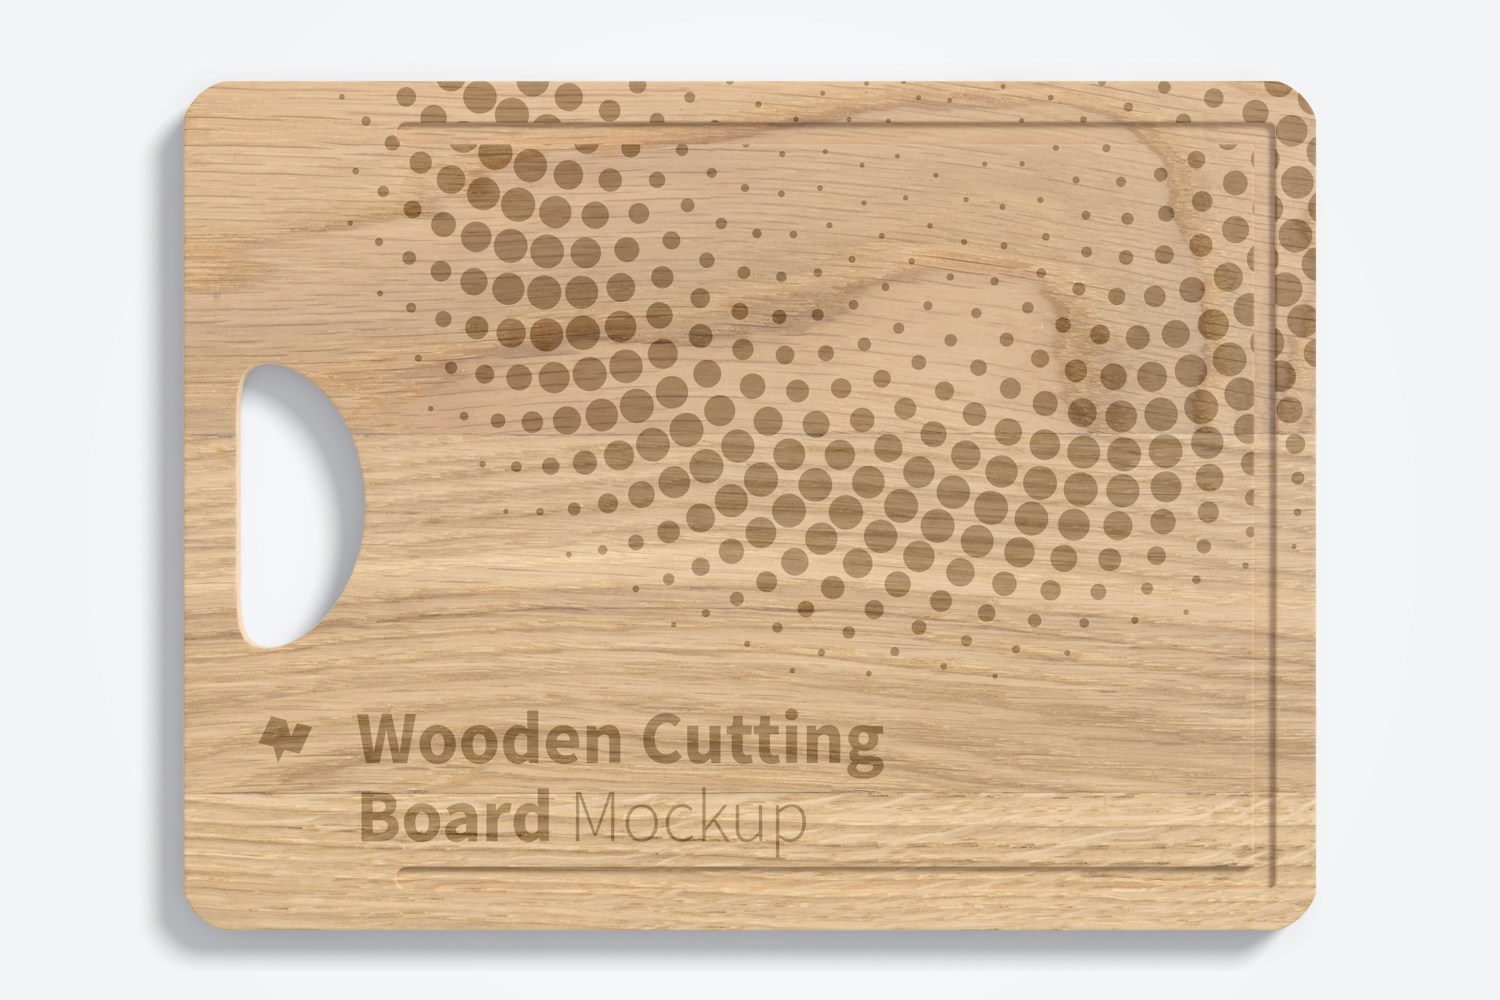 Wooden Cutting Board Mockup, Top View